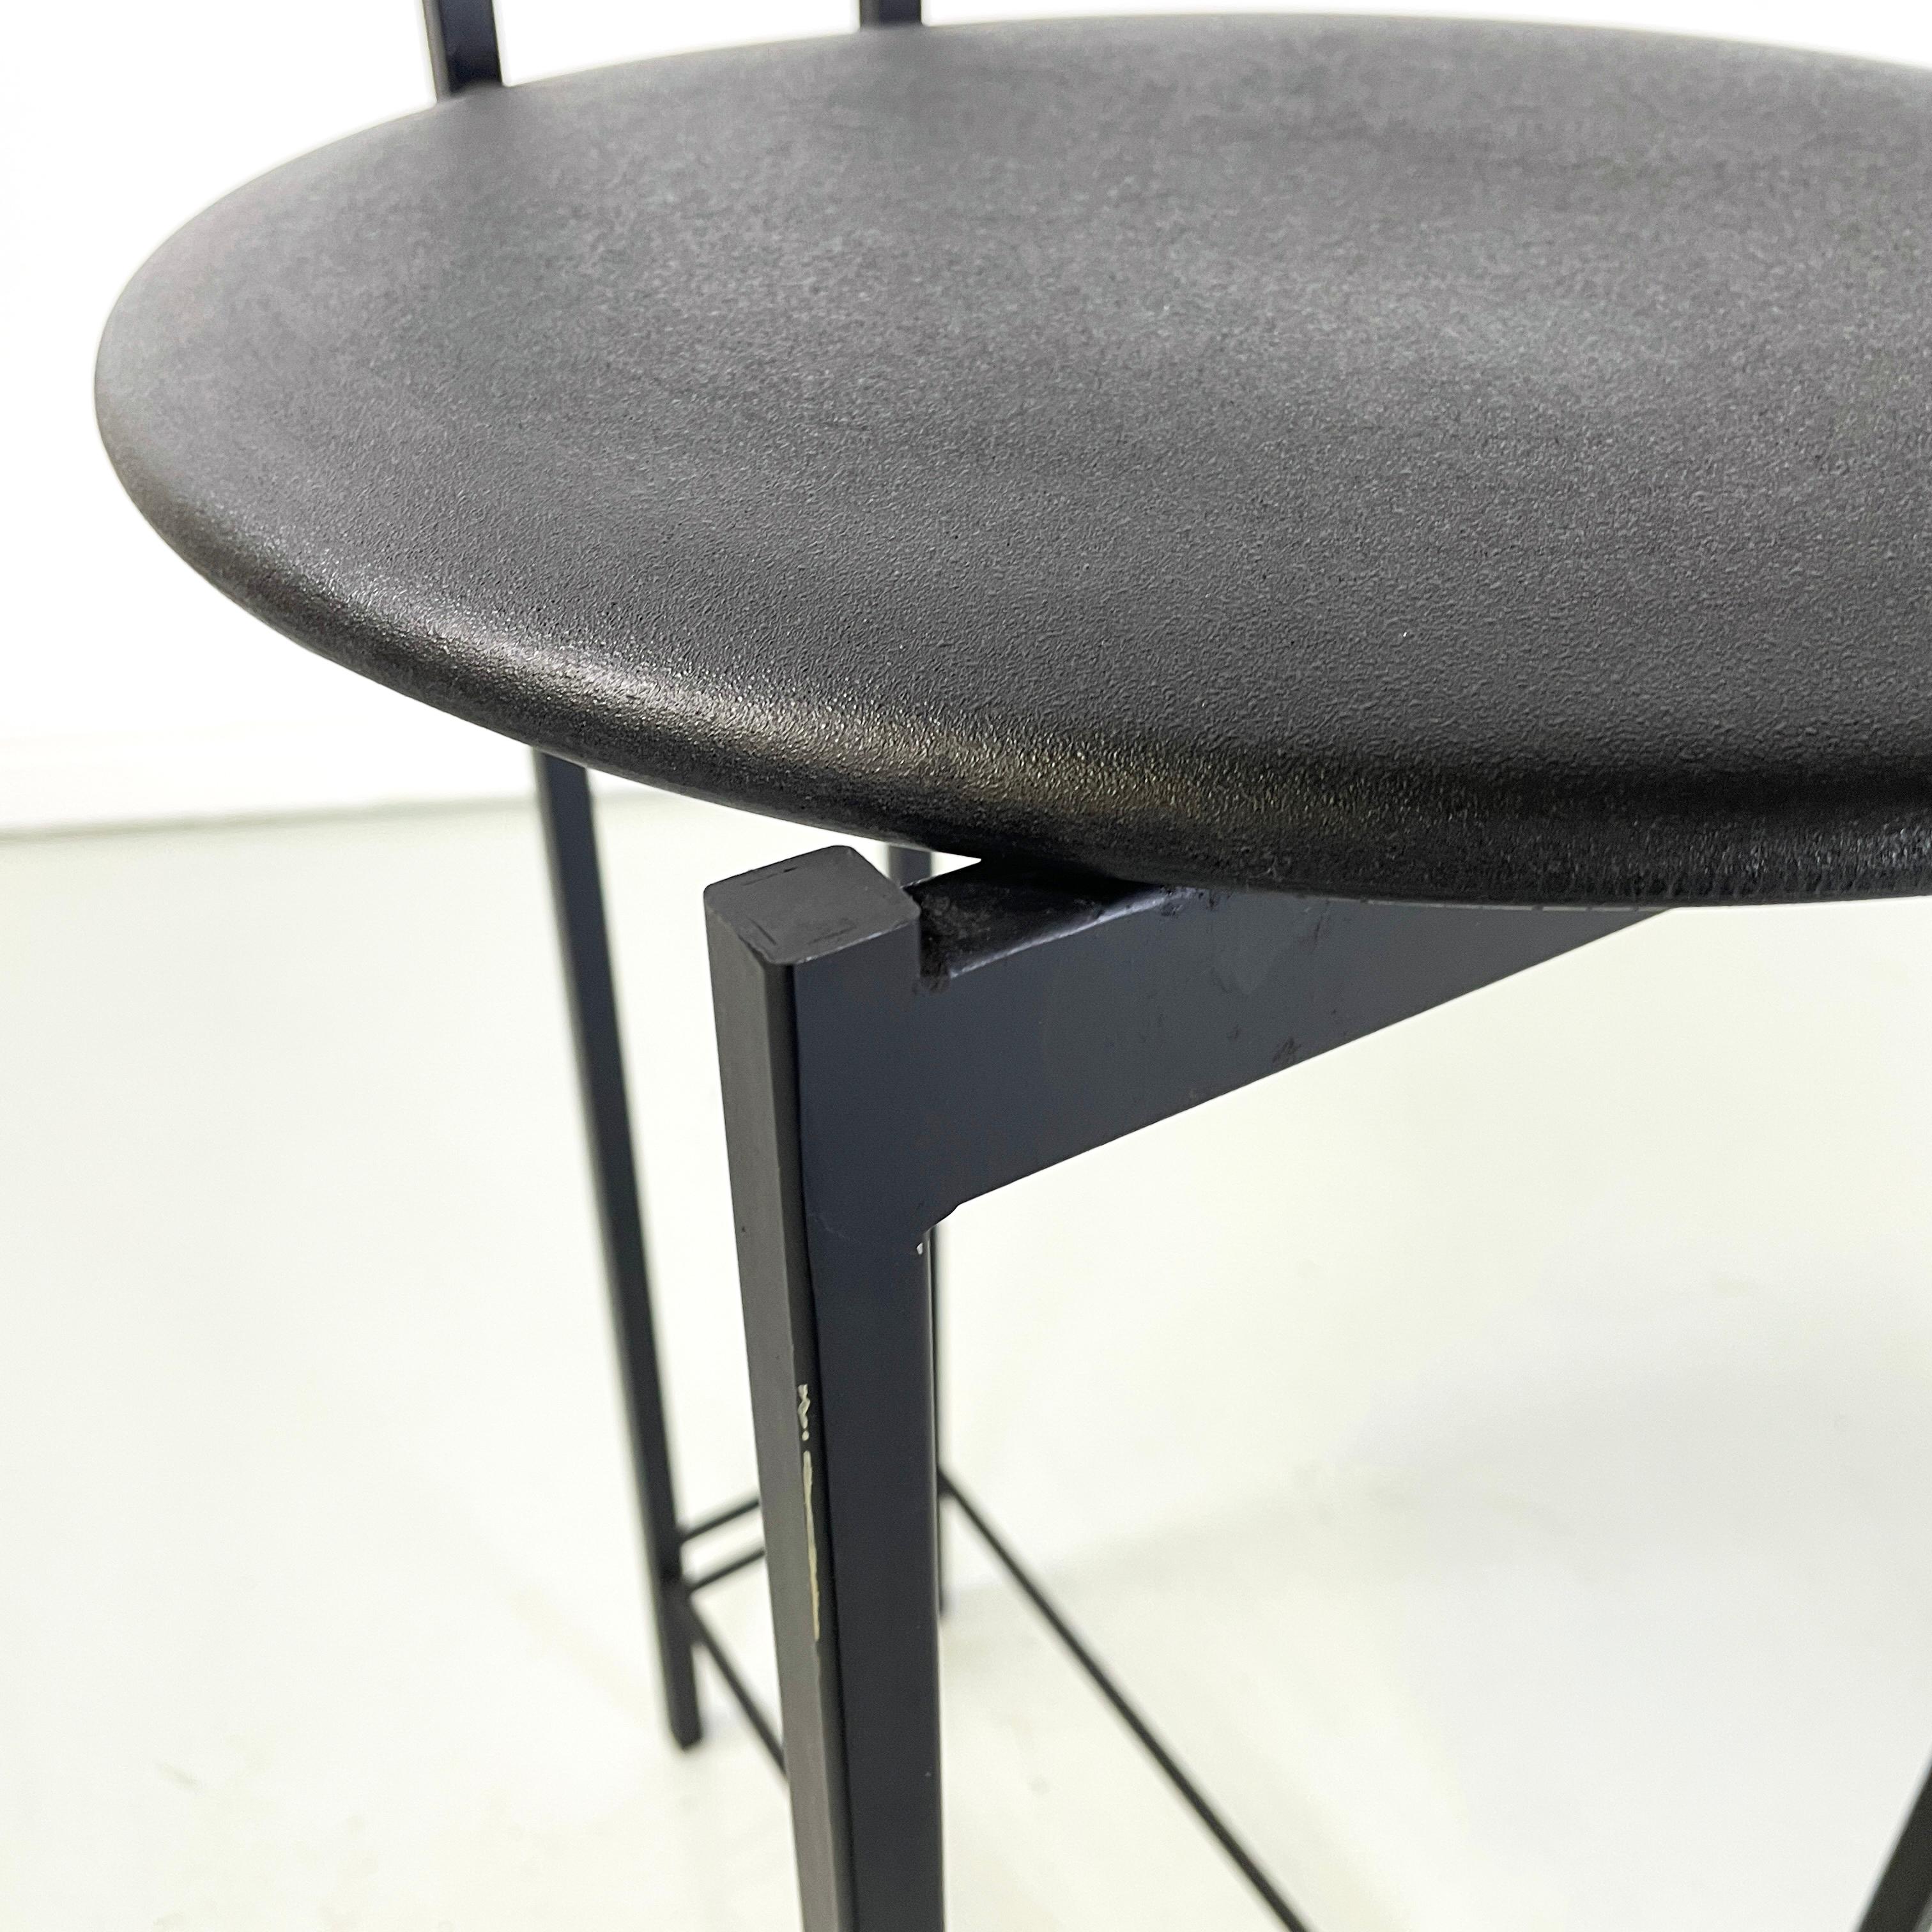 Italian modern high stool in black metal and rubber, 1980s For Sale 5